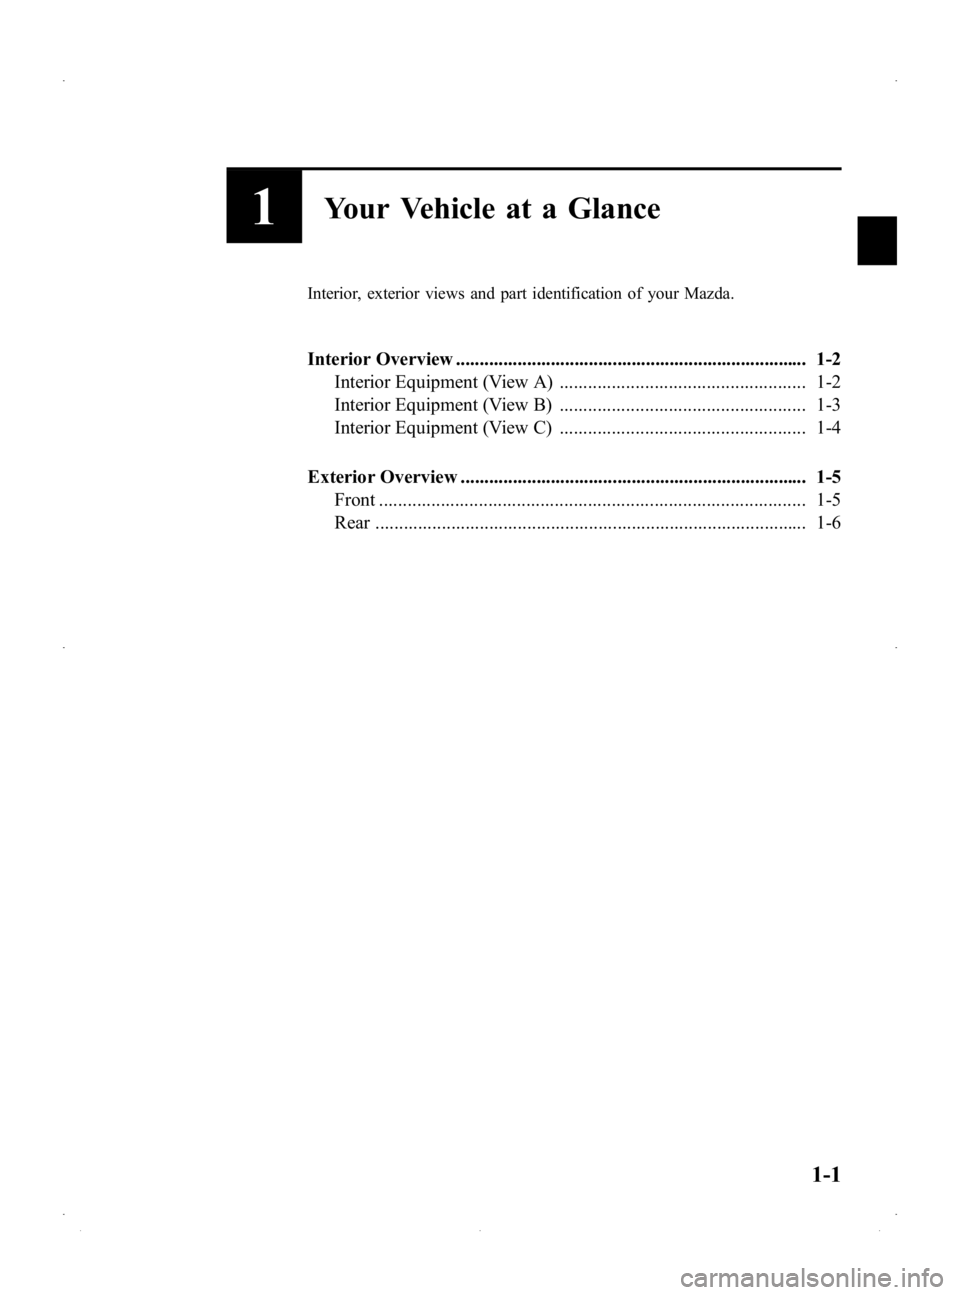 MAZDA MODEL 2 2014  Owners Manual Black plate (7,1)
1Your Vehicle at a Glance
Interior, exterior views and part identification of your Mazda.
Interior Overview ..........................................................................